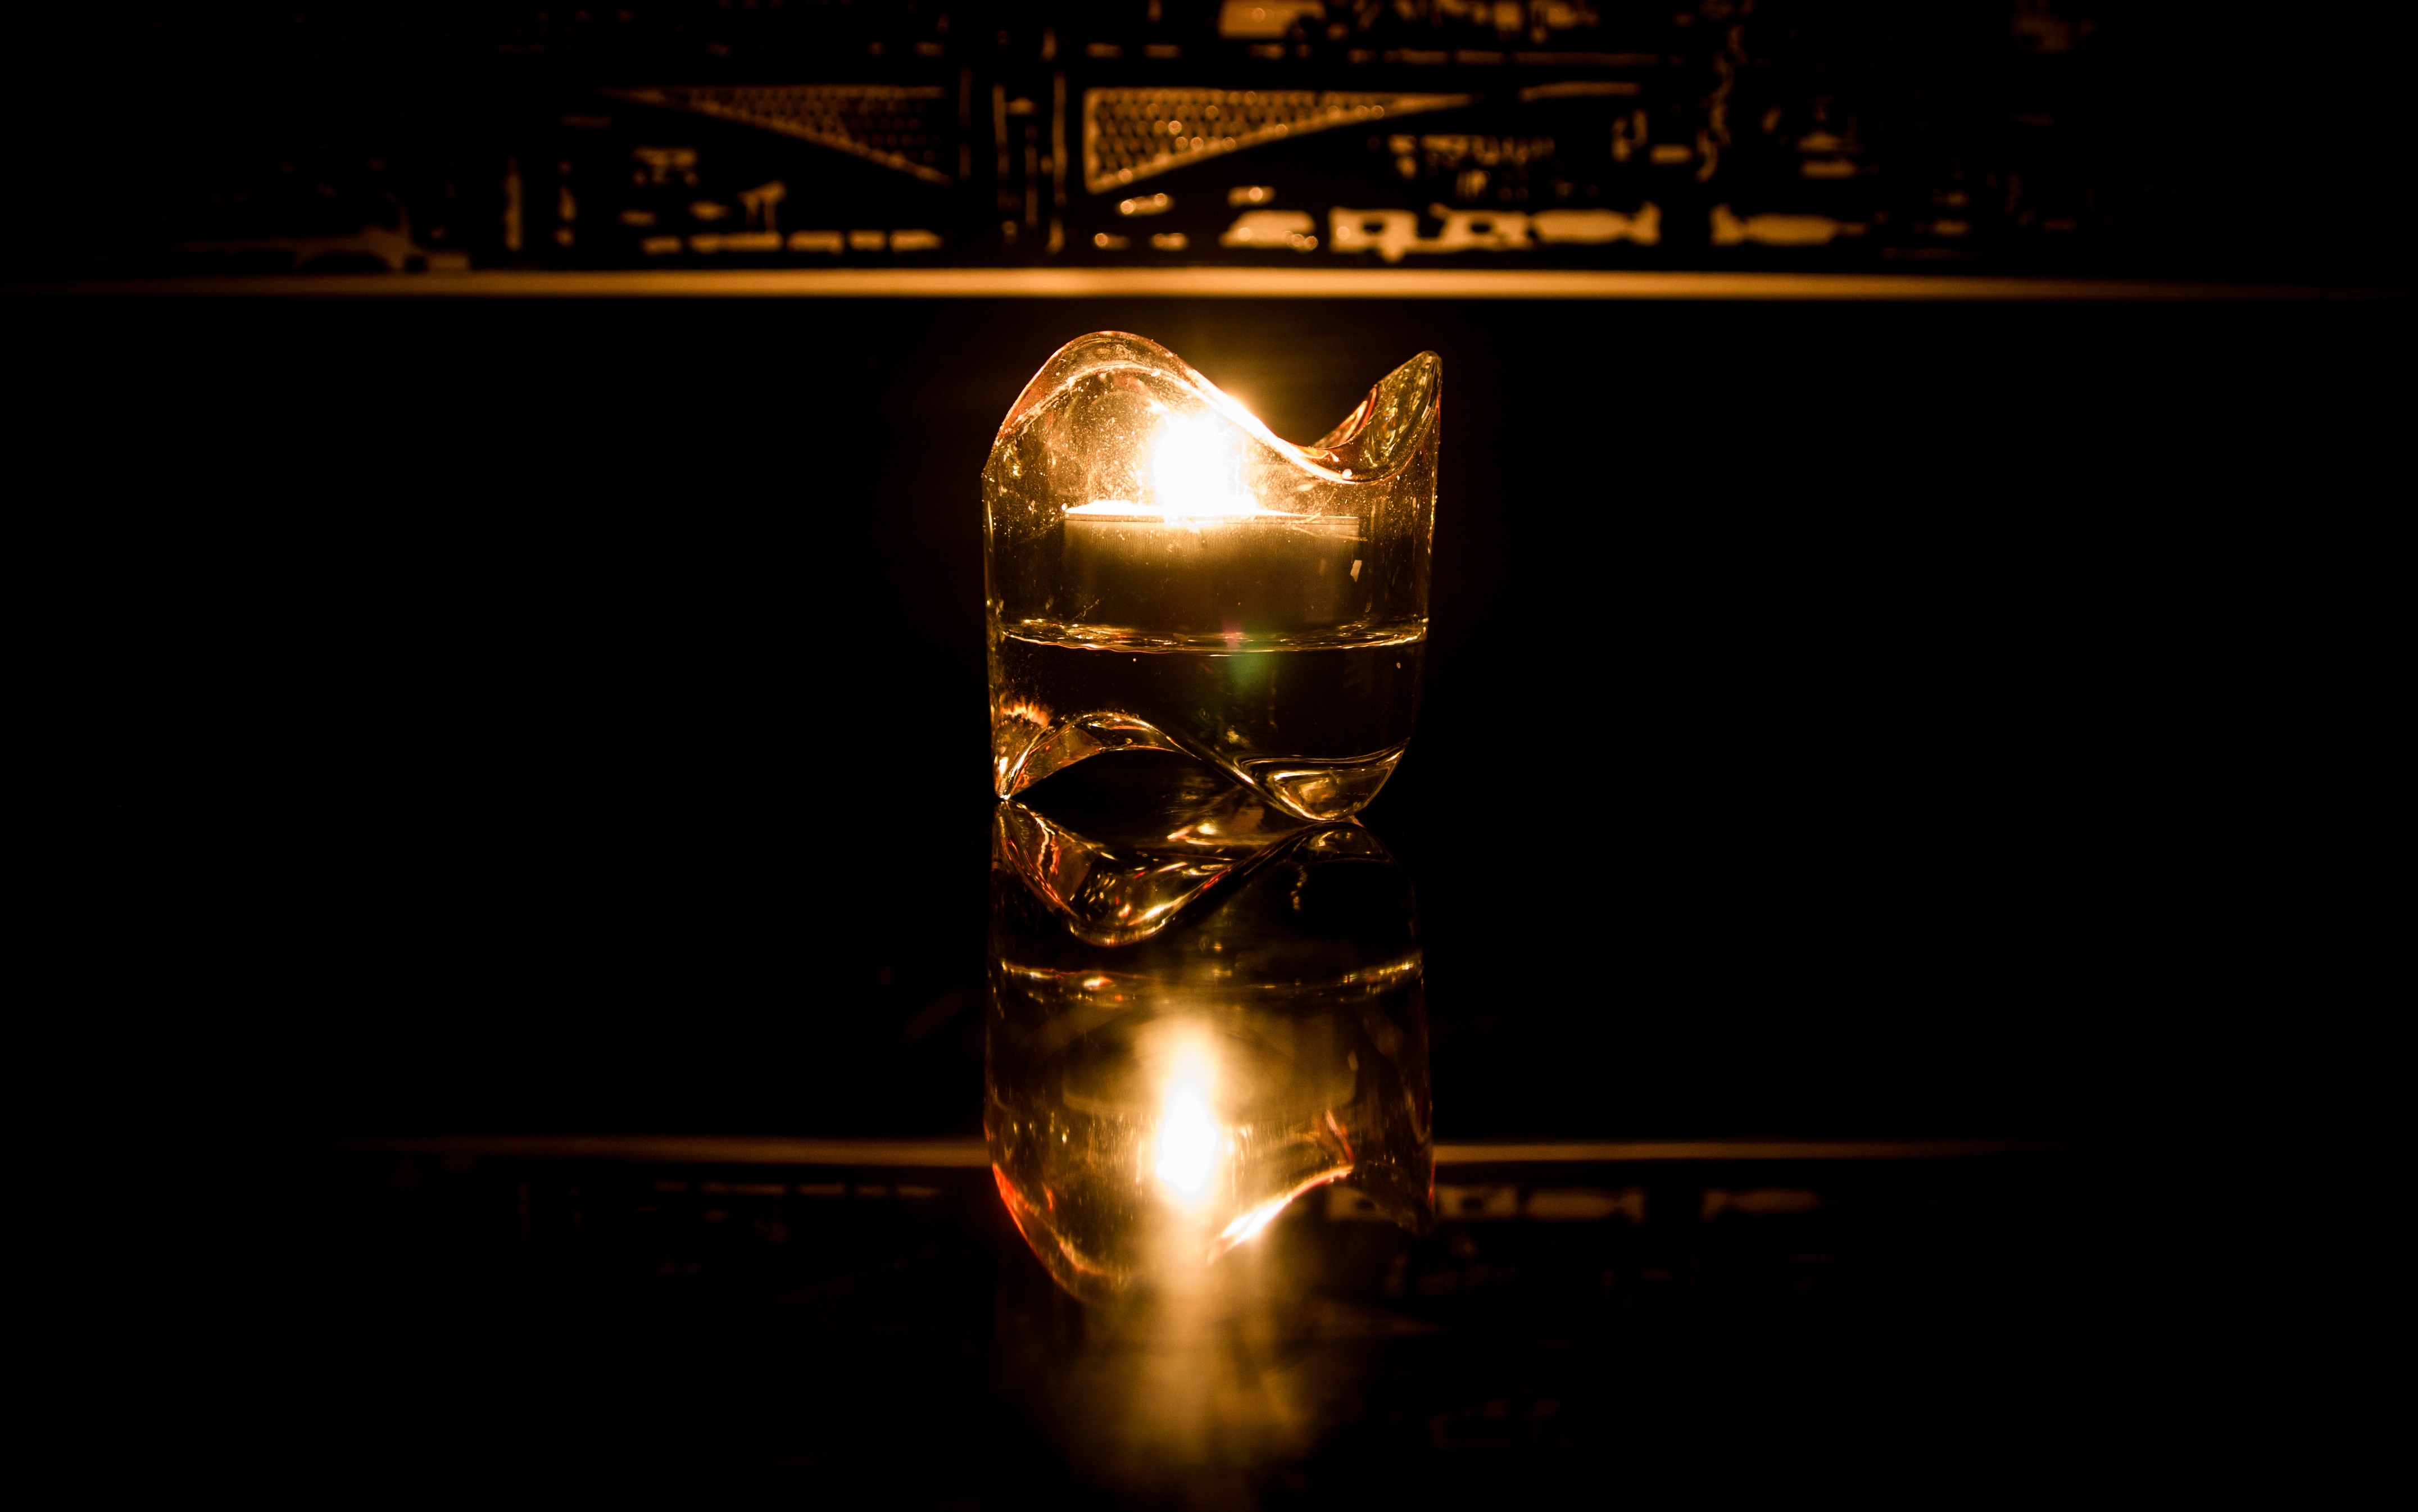 Candle at night, Atmosphere, Black background, Candle, Candles, HQ Photo